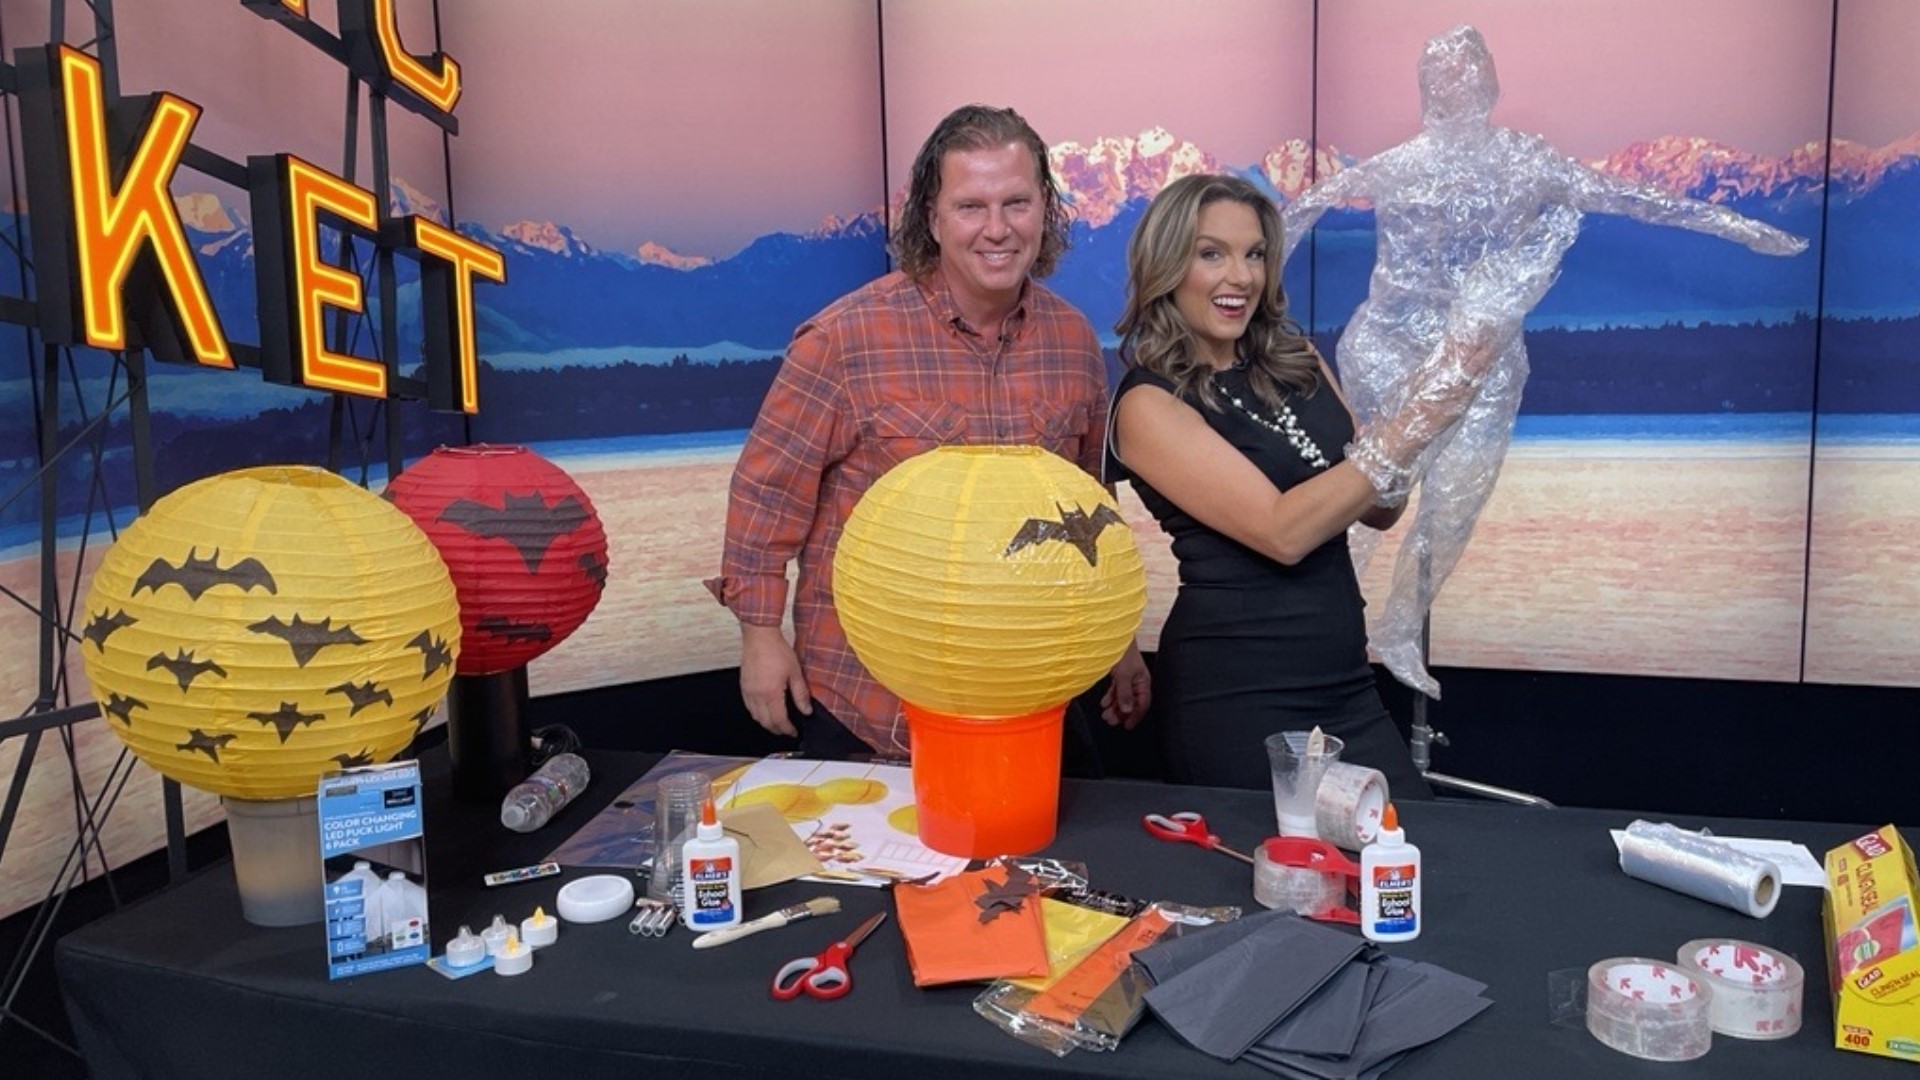 Handyman Huffines shows us how to make ghosts from human shapes and packing tape. Plus bat lanterns that give your yard that creepy glow. #newdaynw